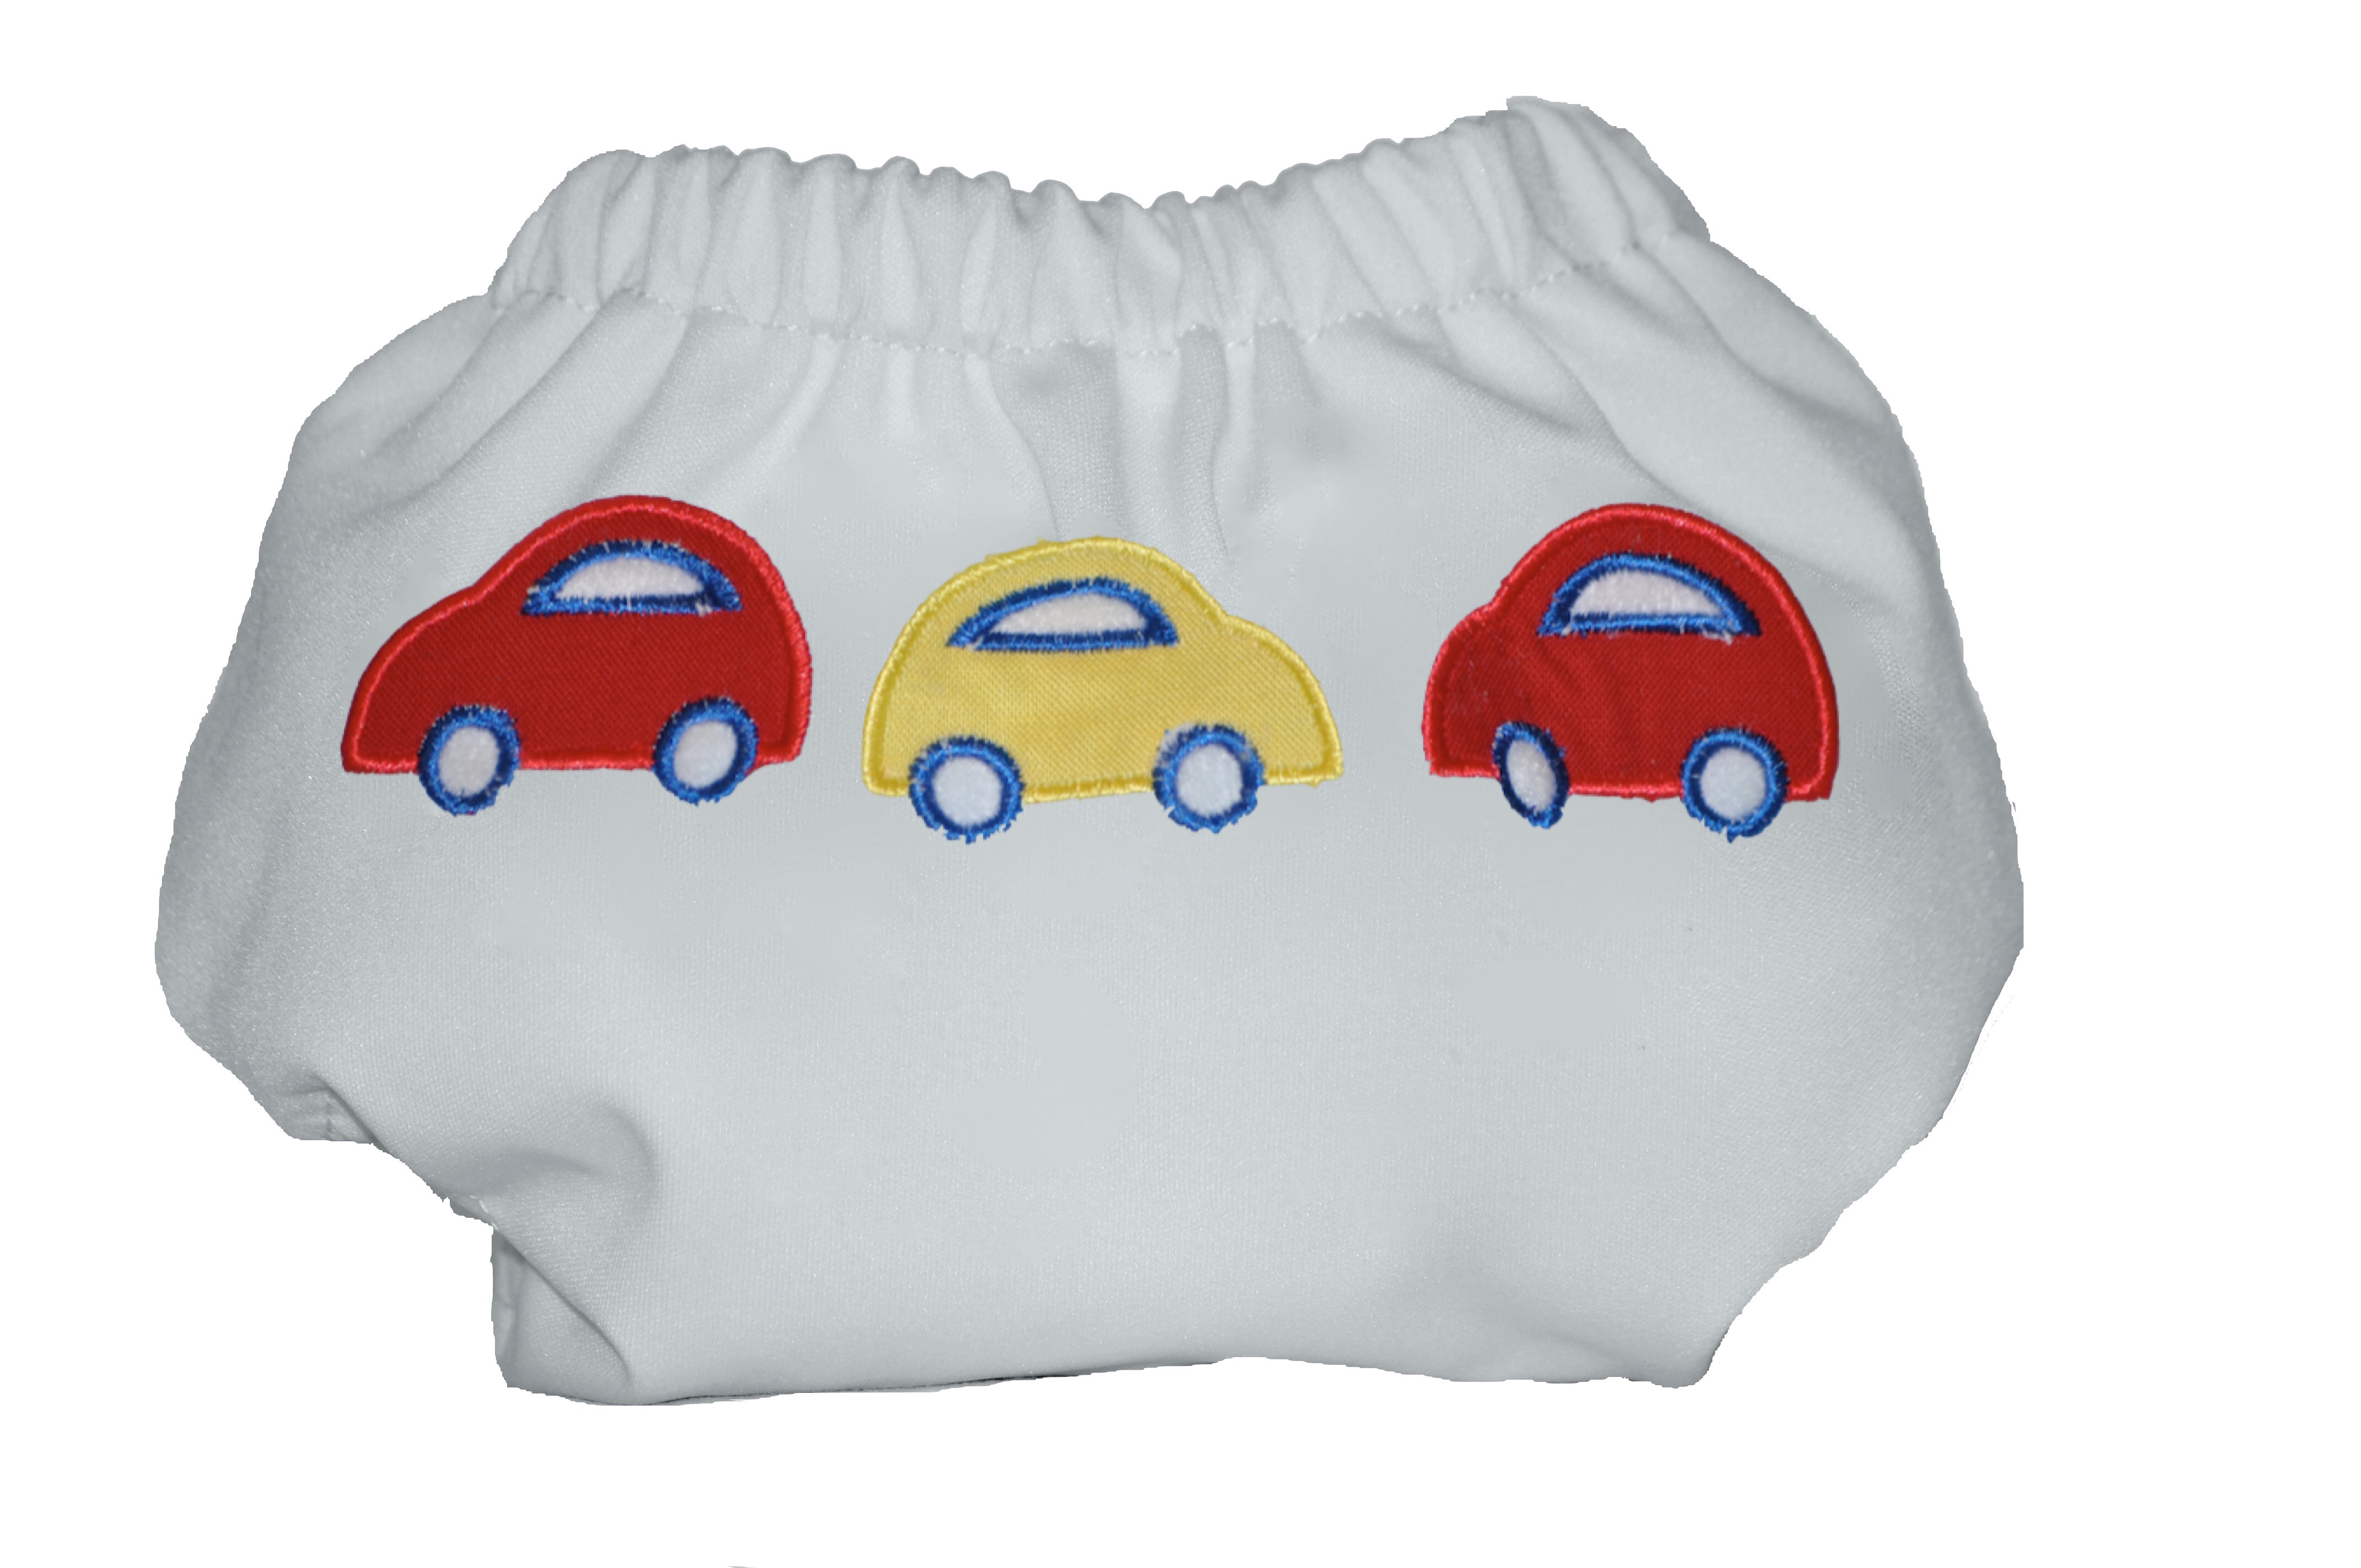 AllComfy One Size Diaper Cover Snap Closure (2 Pack) "Vroom!"